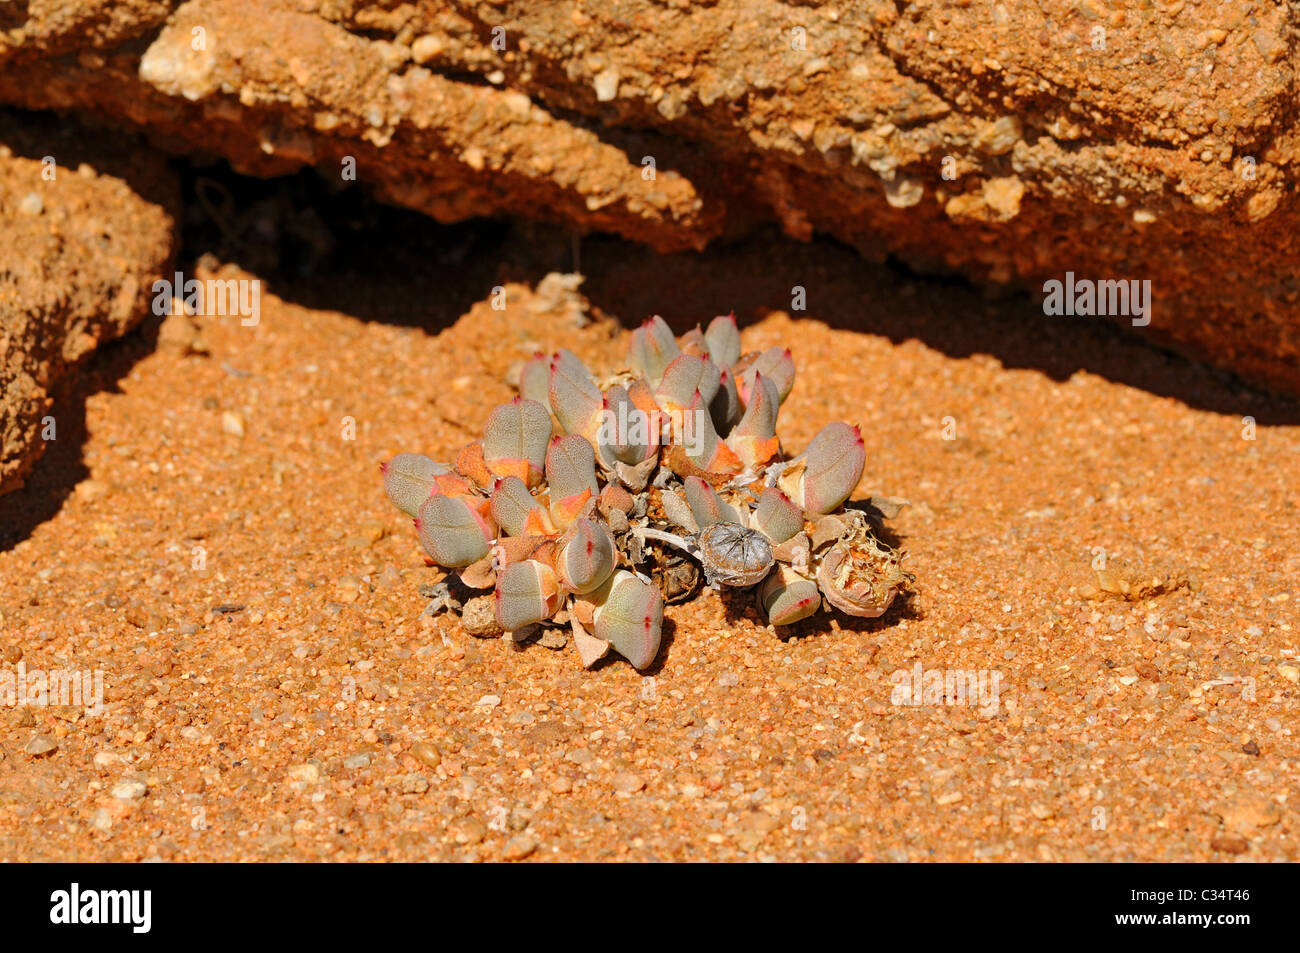 Cheiridopsis sp. in habitat, cushion forming dwarf form, Mesembs, Aizoaceae, Goegap Nature Reserve, Namaqualand, South Africa Stock Photo